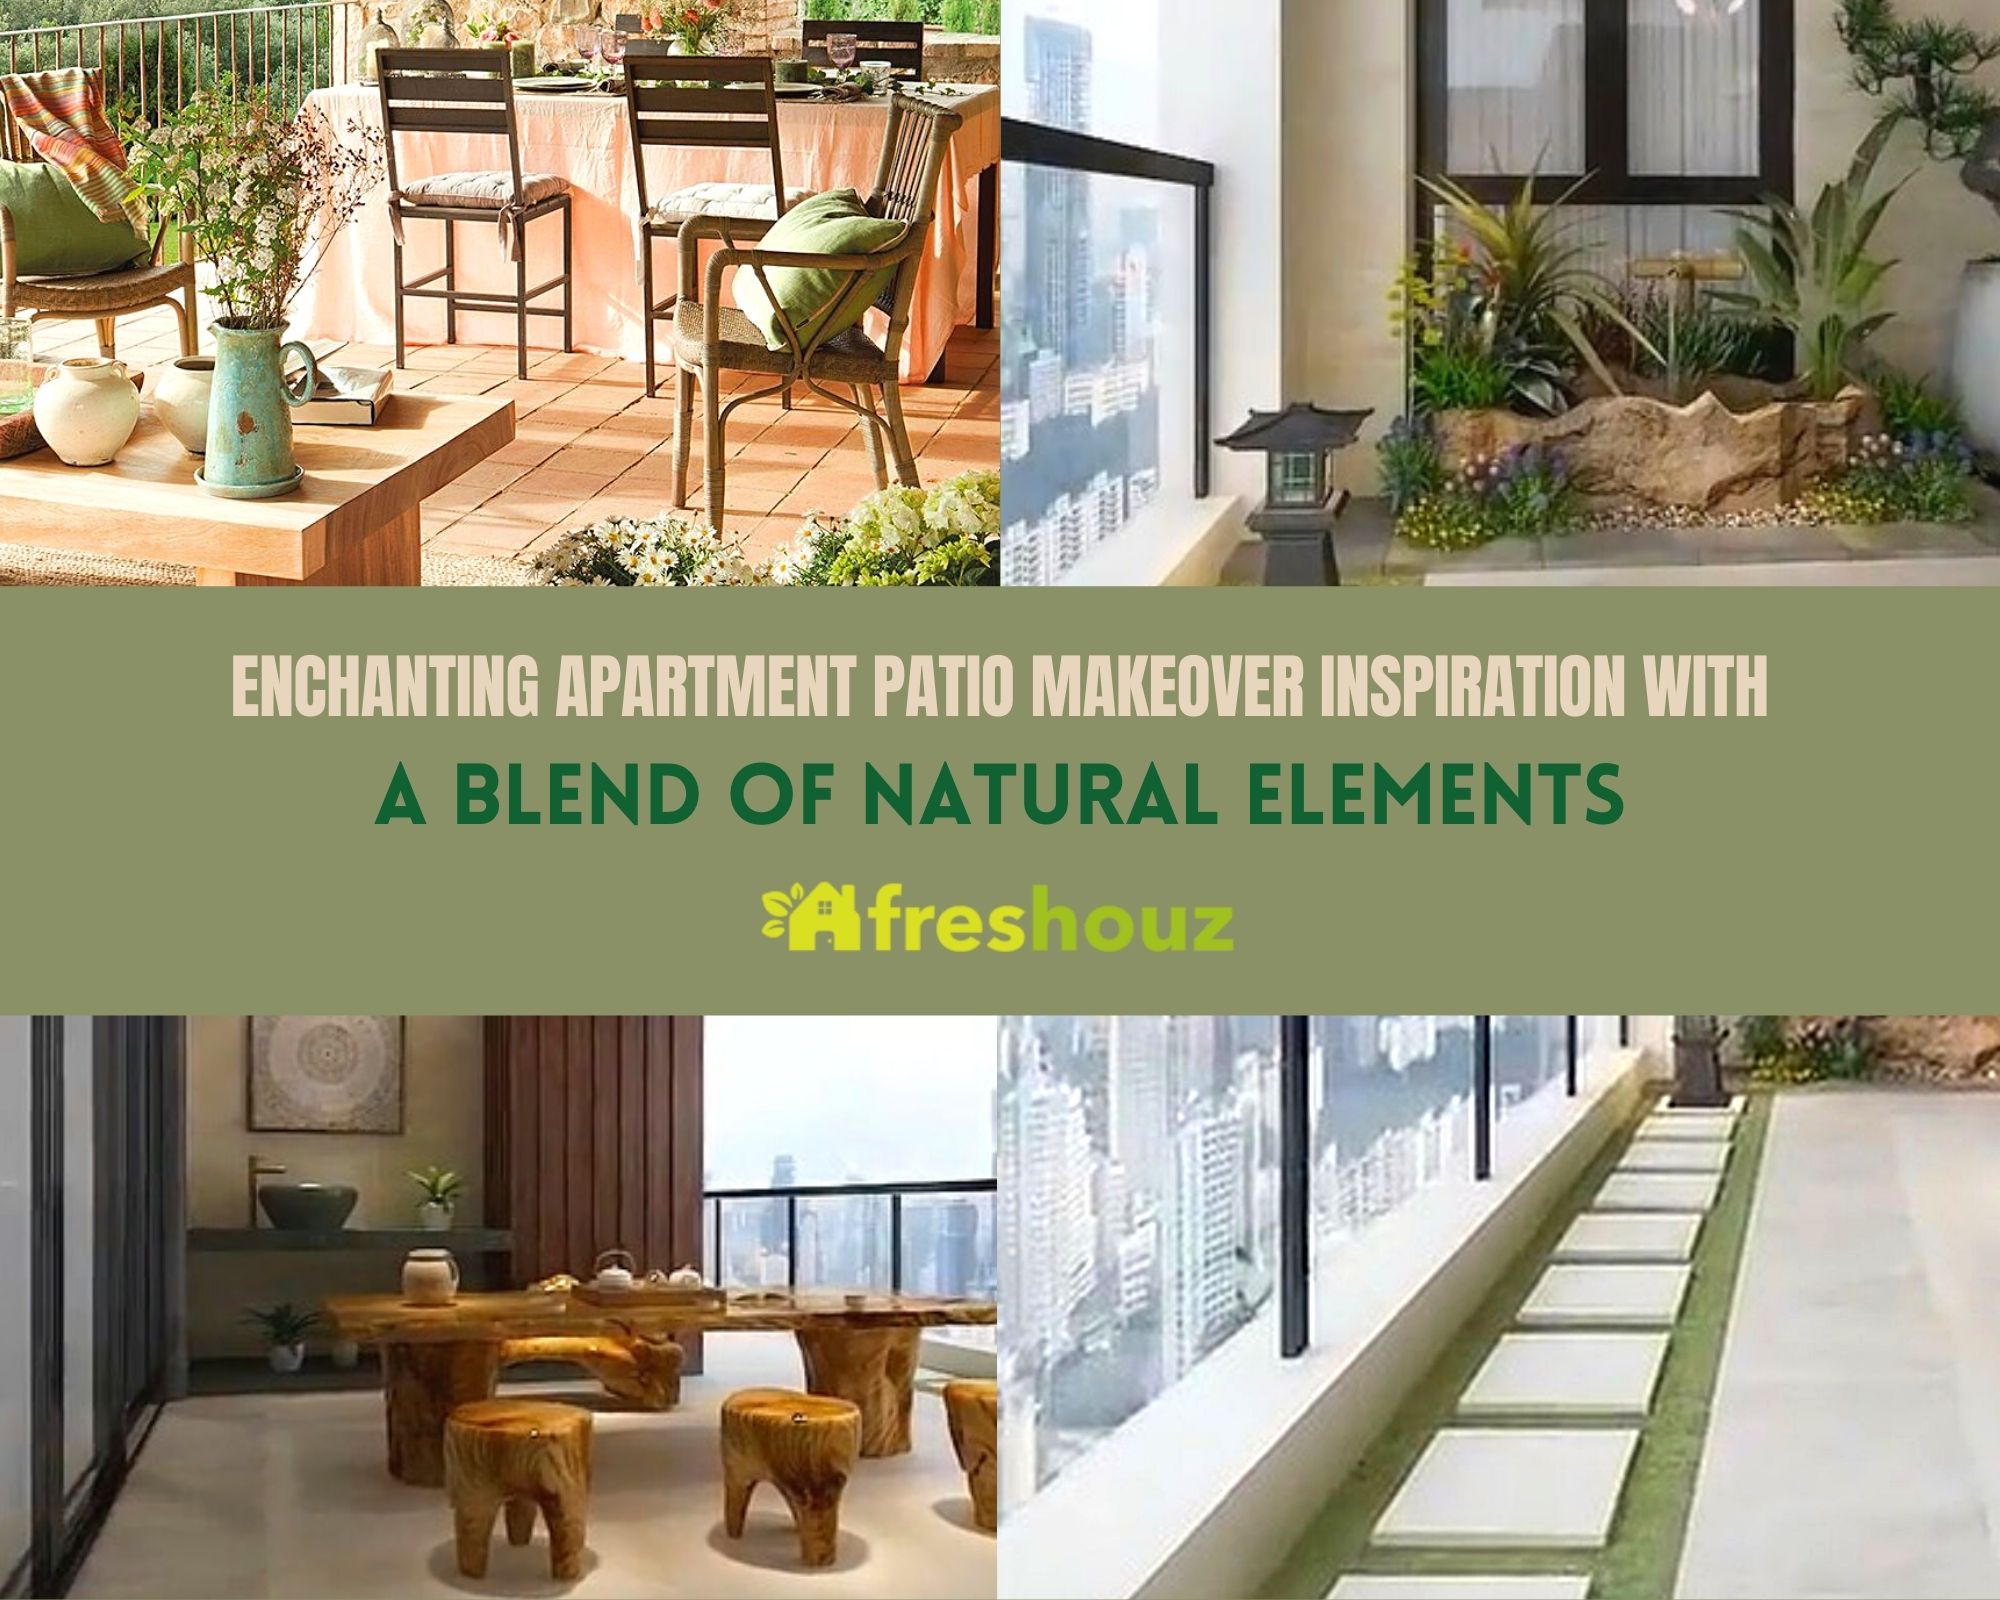 Enchanting Apartment Patio Makeover Inspiration With A Blend Of Natural Elements